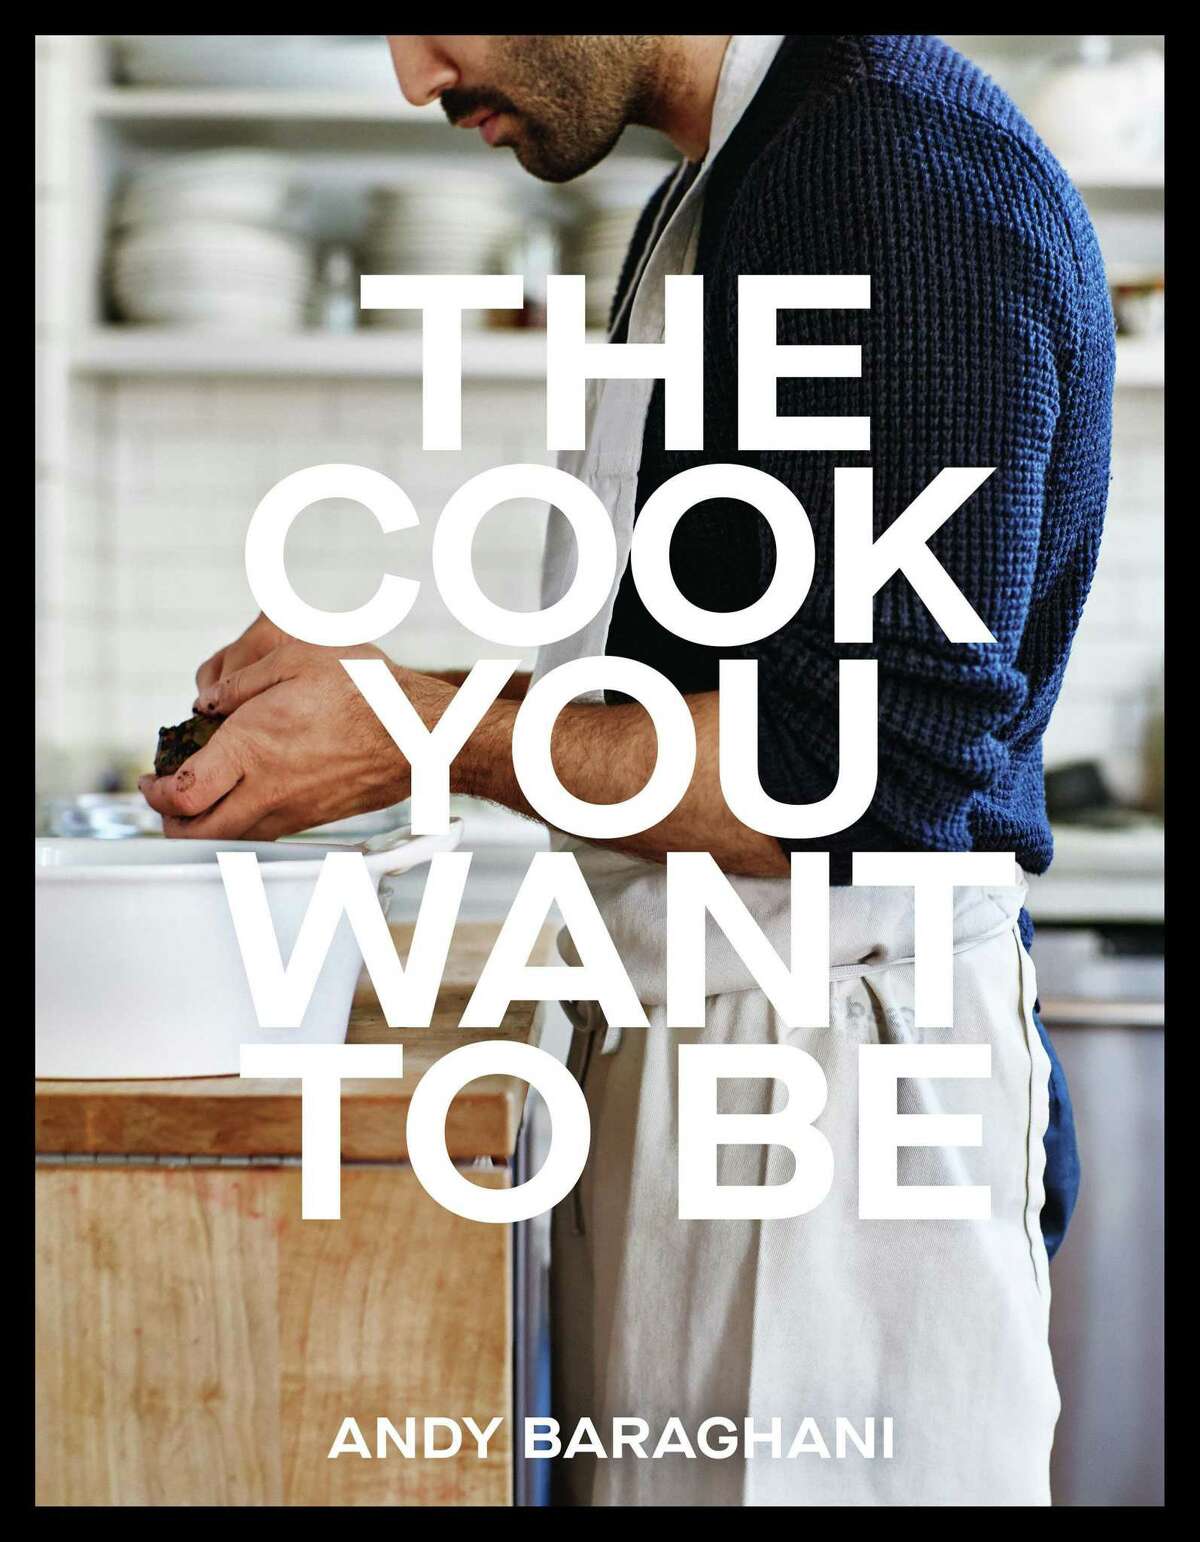 “The Cook You Want to Be” by Andy Baraghani.